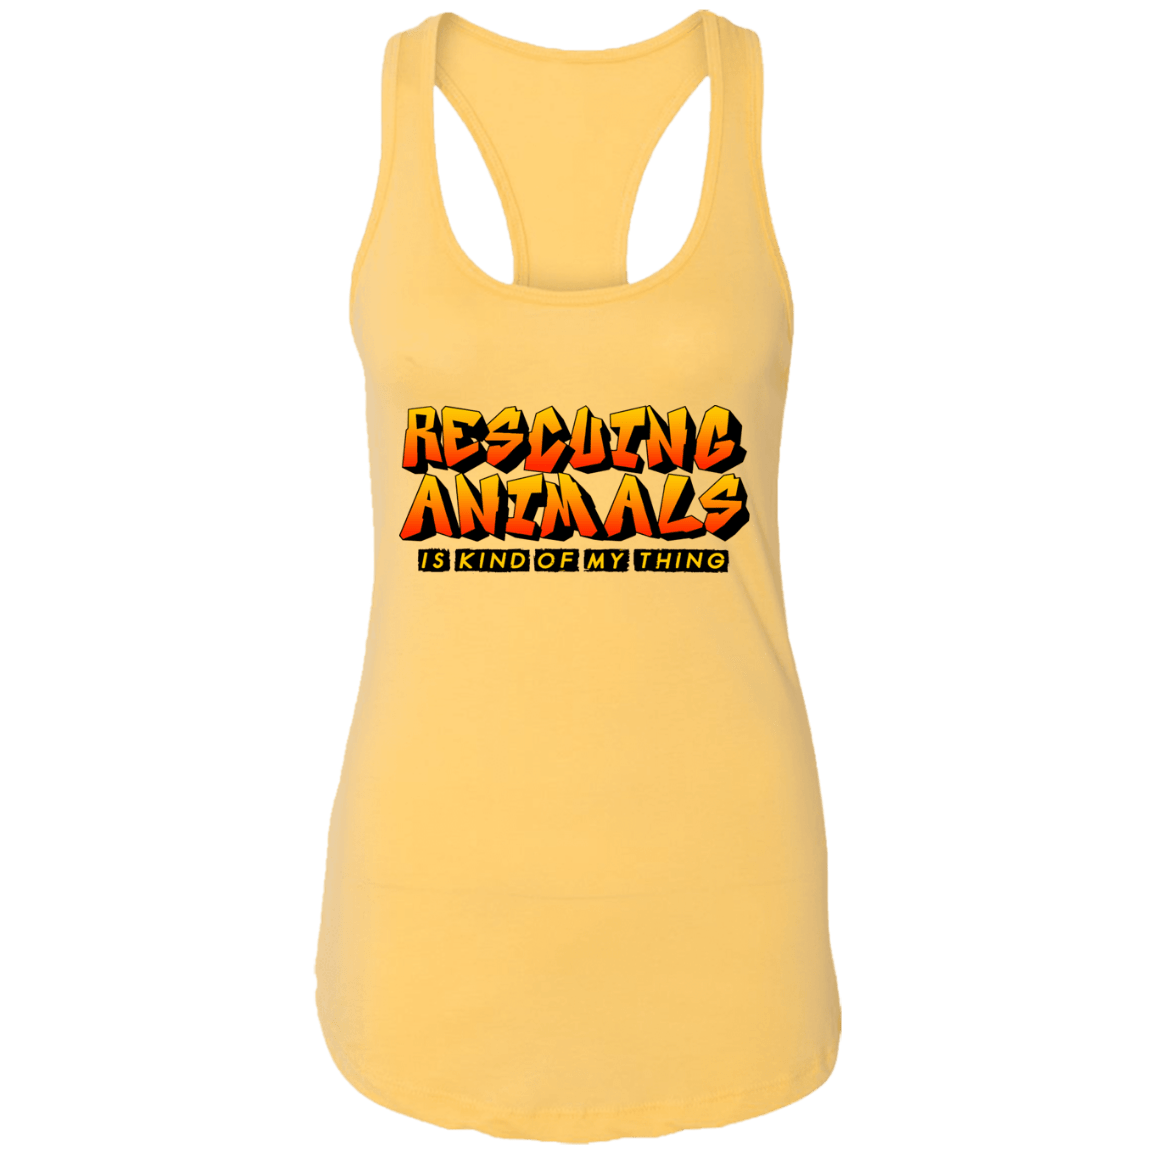 Rescuing Animals Is My Kind Of Thing - Ladies Racer Back Tank.